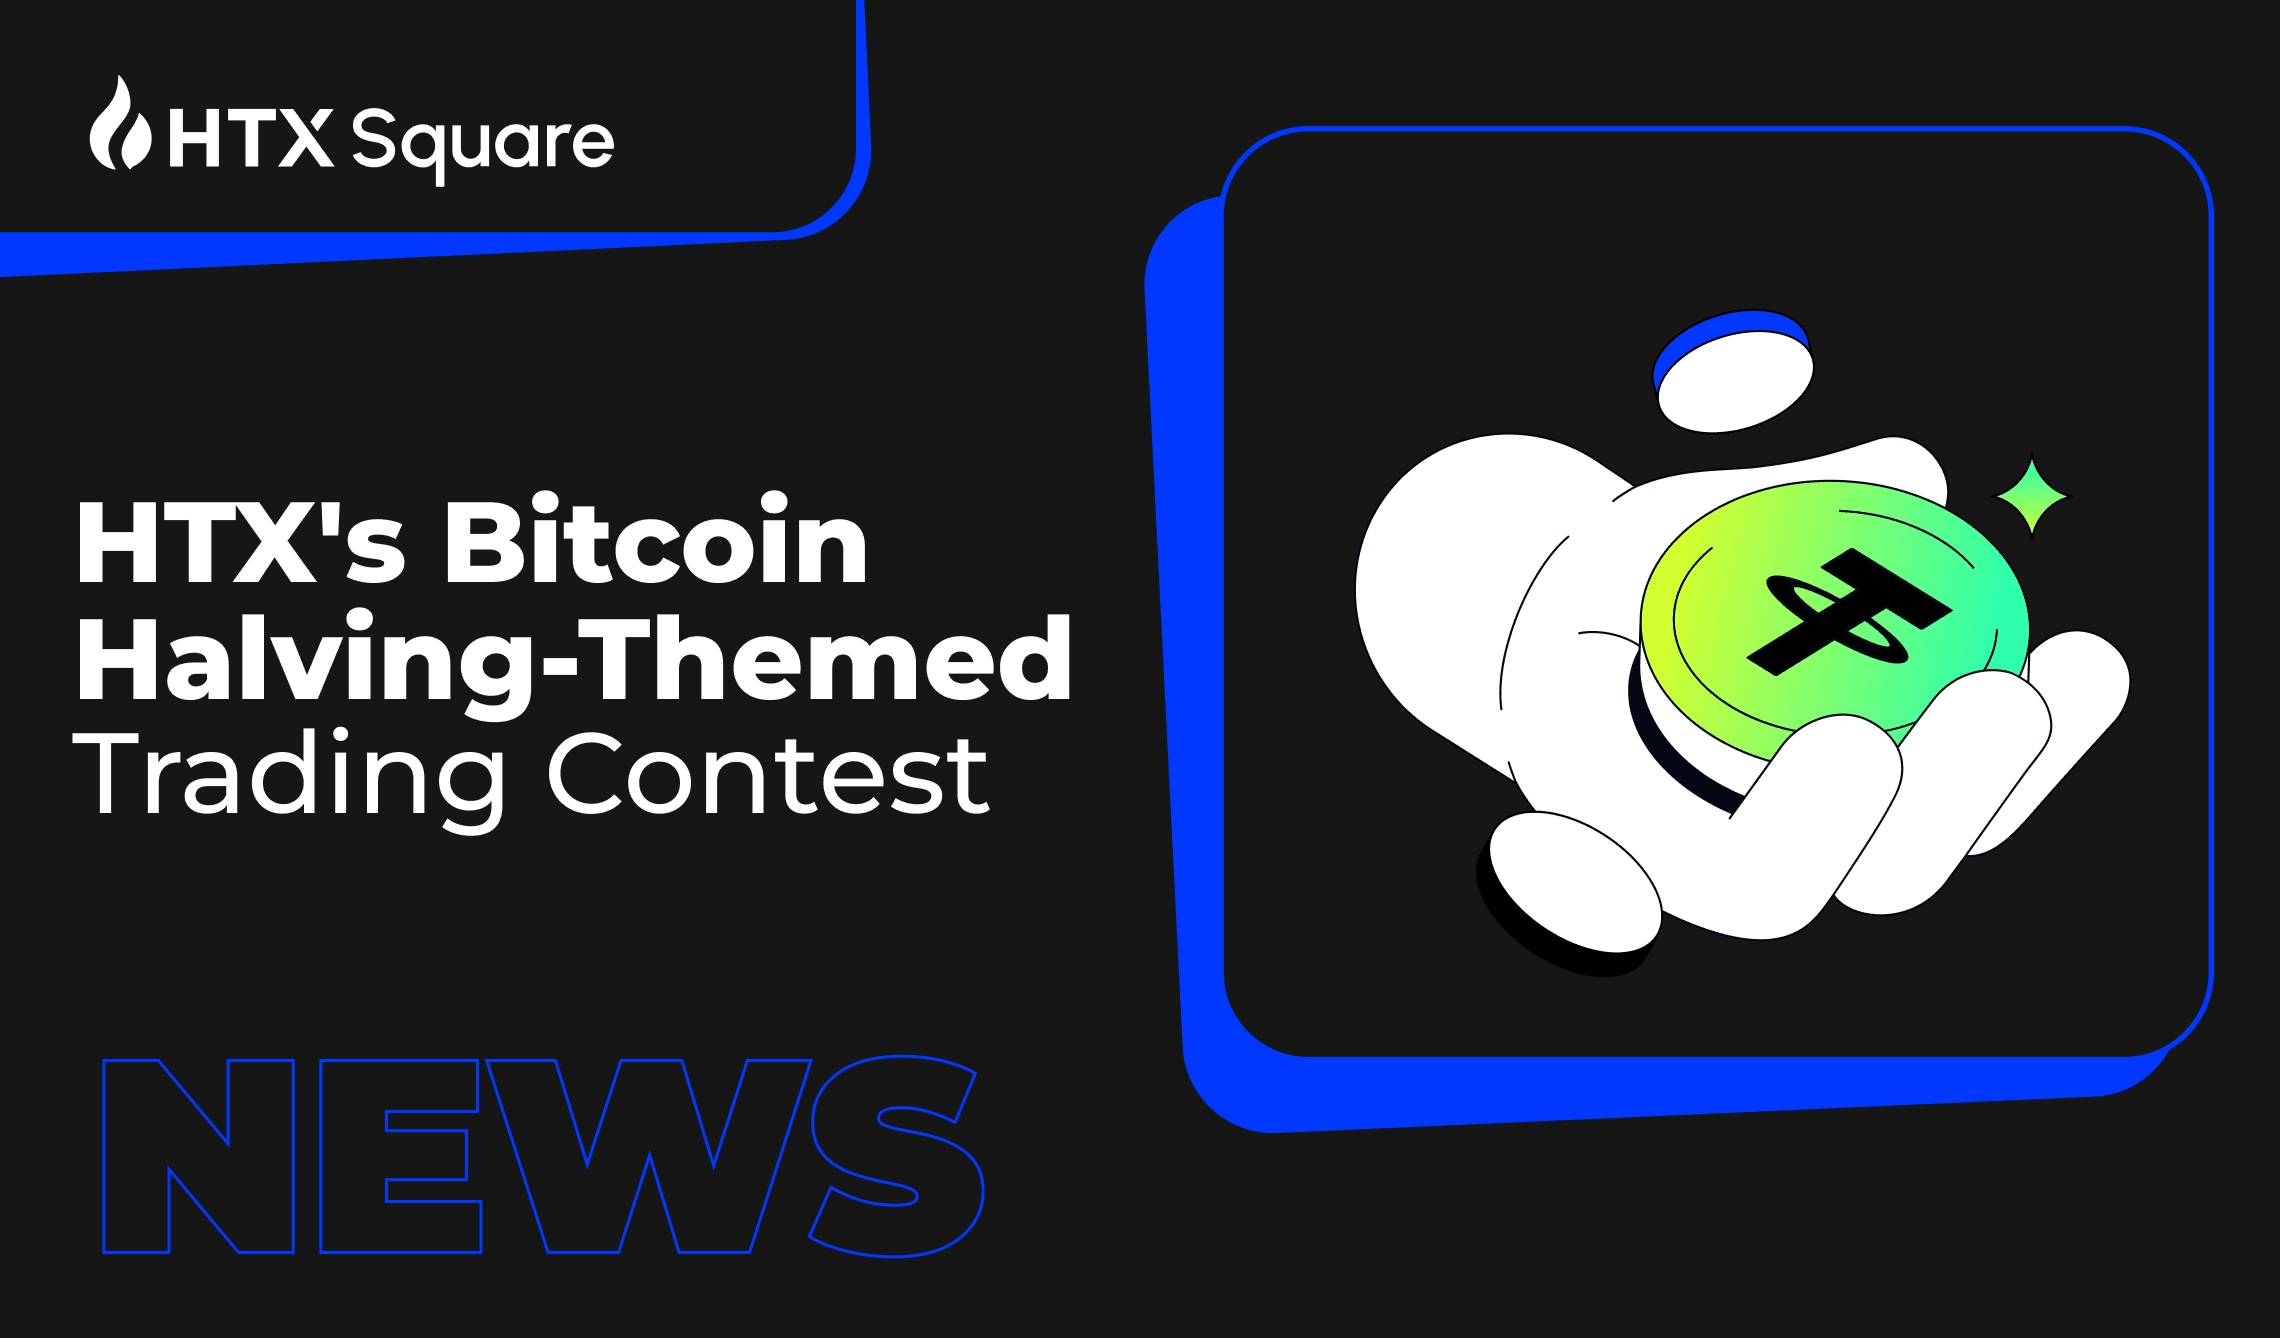 Bitcoin’s 4th Halving Is Approaching! Vie for 30,000 USDT in HTX’s Bitcoin Halving-Themed Trading Contest